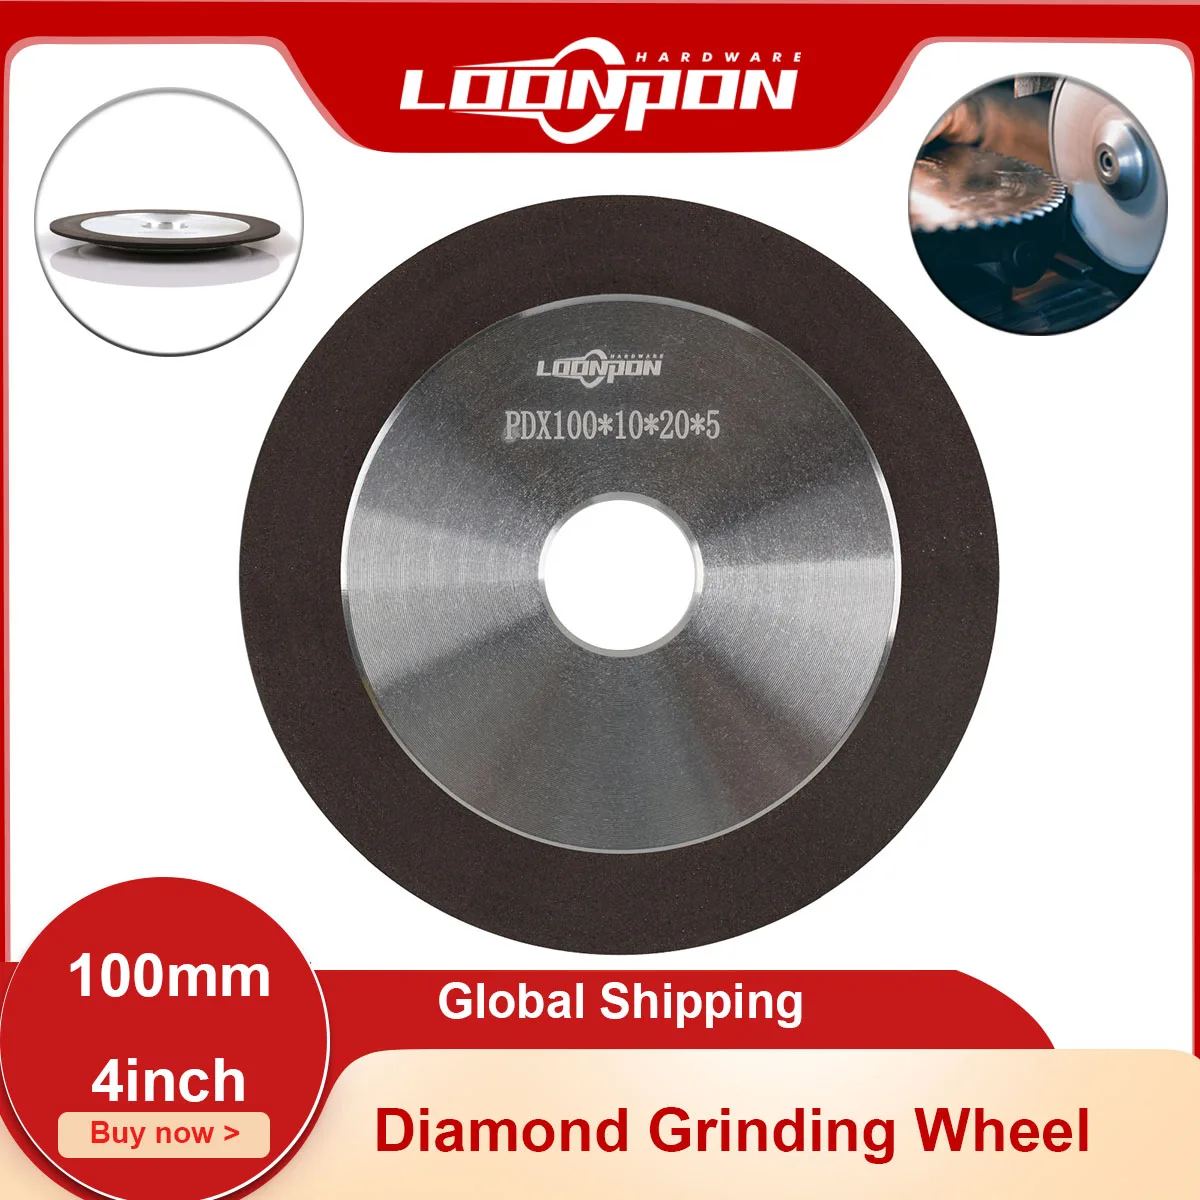 10pcs tungsten grinding head set electric grinder tungsten steel rotary tool cutter shank double carving metalworking milling 100mm/4inch Diamond Grinding Wheel Grinding Circle Grit 150 for Tungsten Steel Milling Cutter Tool Sharpener Grinder